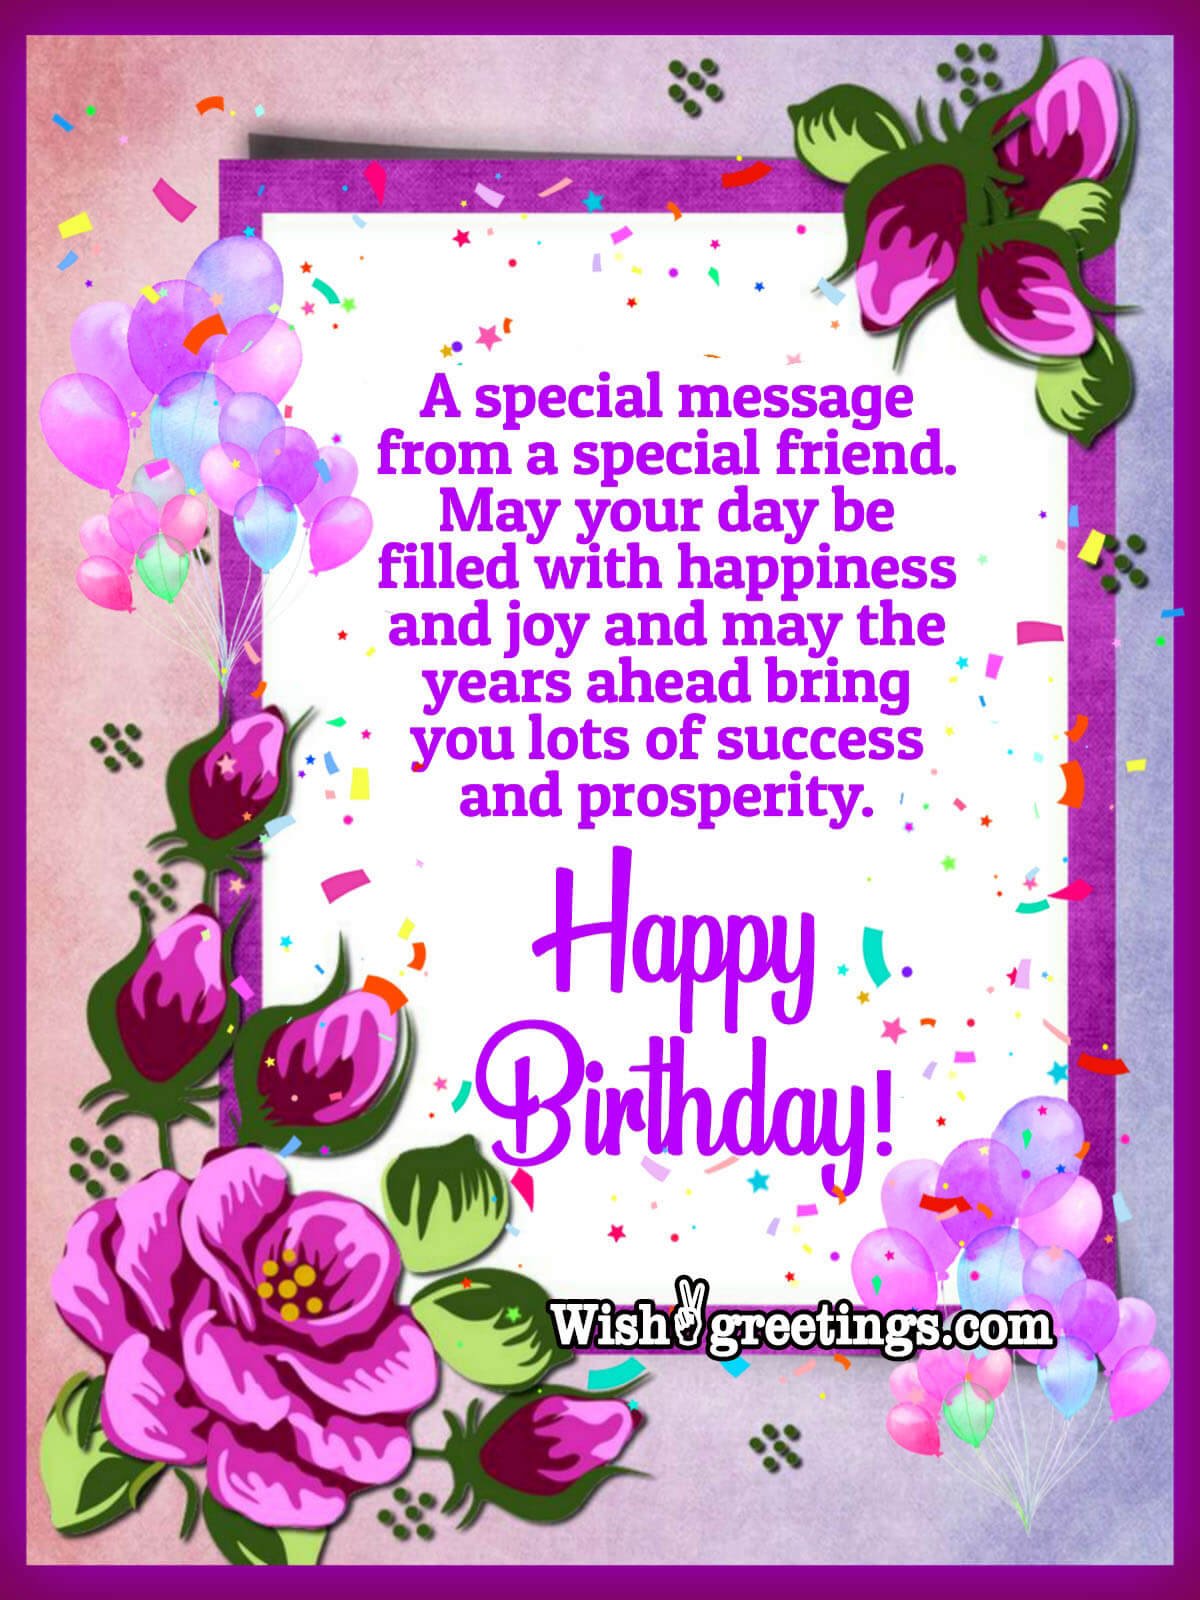 Birthday Message Image For Special Friend